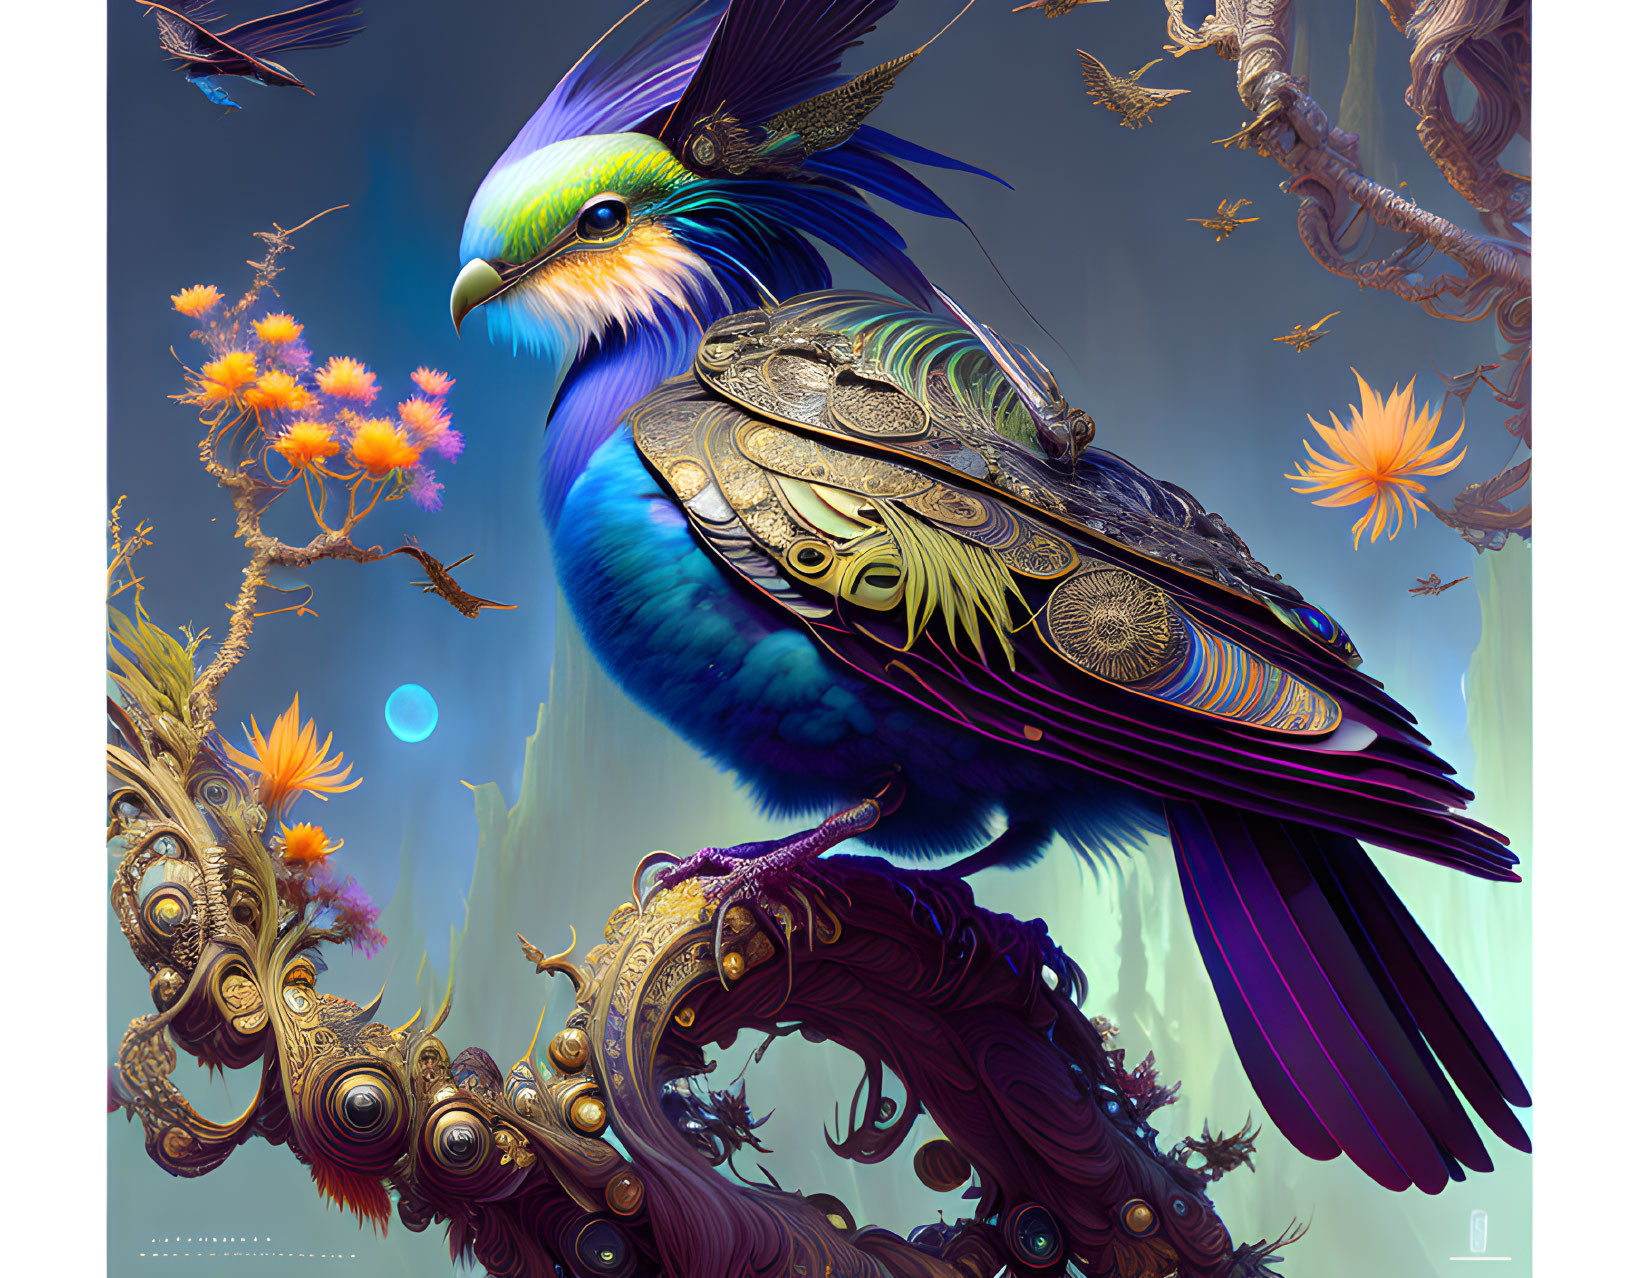 Colorful fantasy bird with metallic feathers perched on whimsical branch under pastel sky